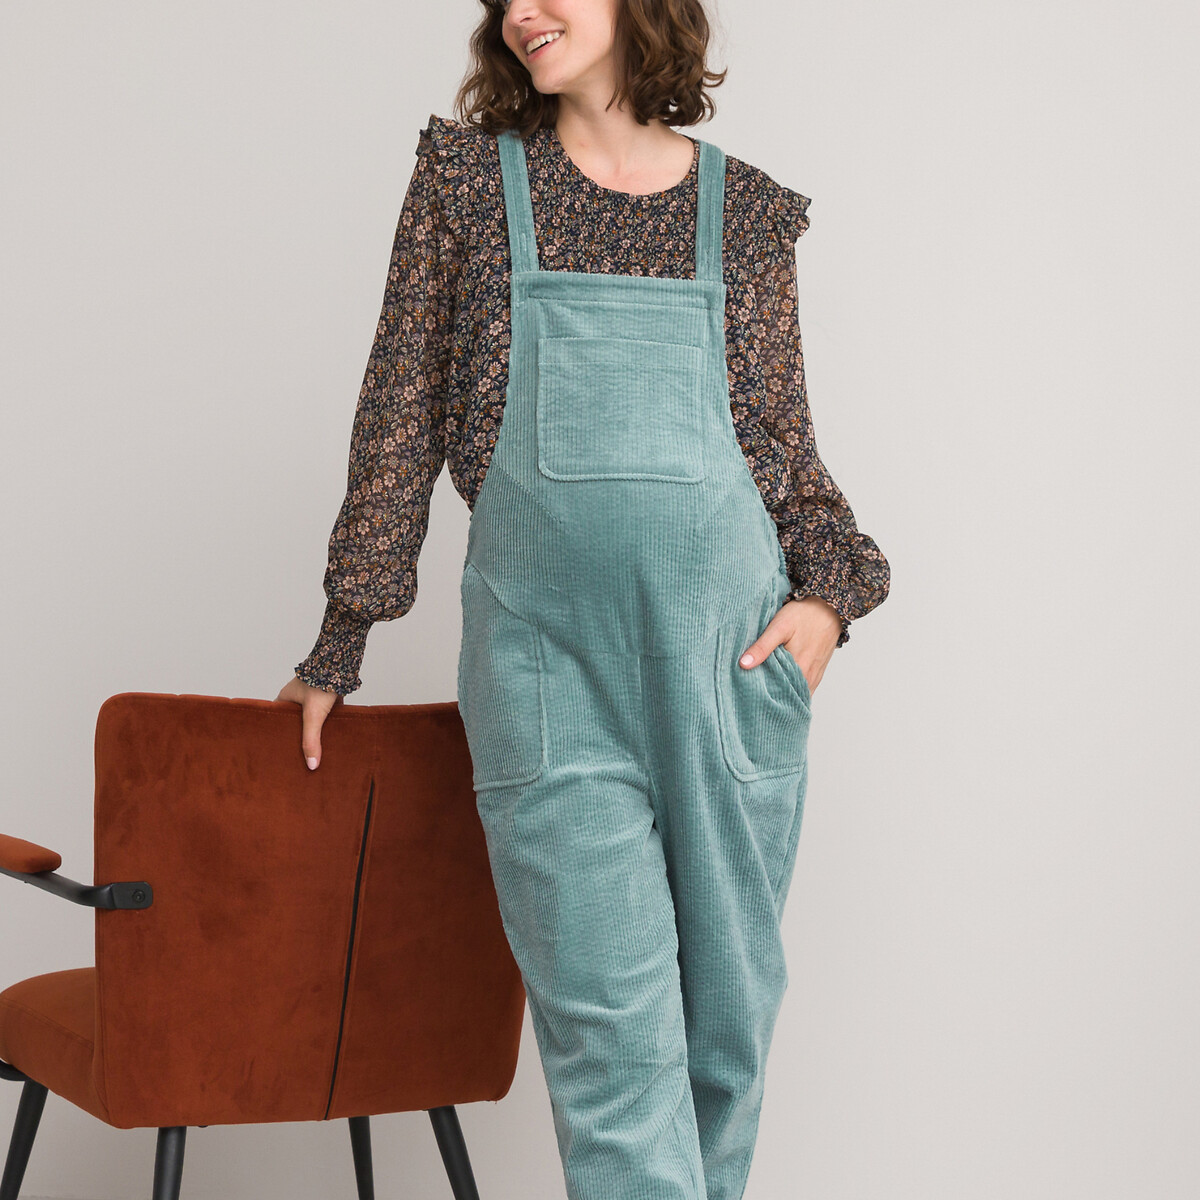 Mango jumpsuit discount 94% Green S WOMEN FASHION Baby Jumpsuits & Dungarees NO STYLE 